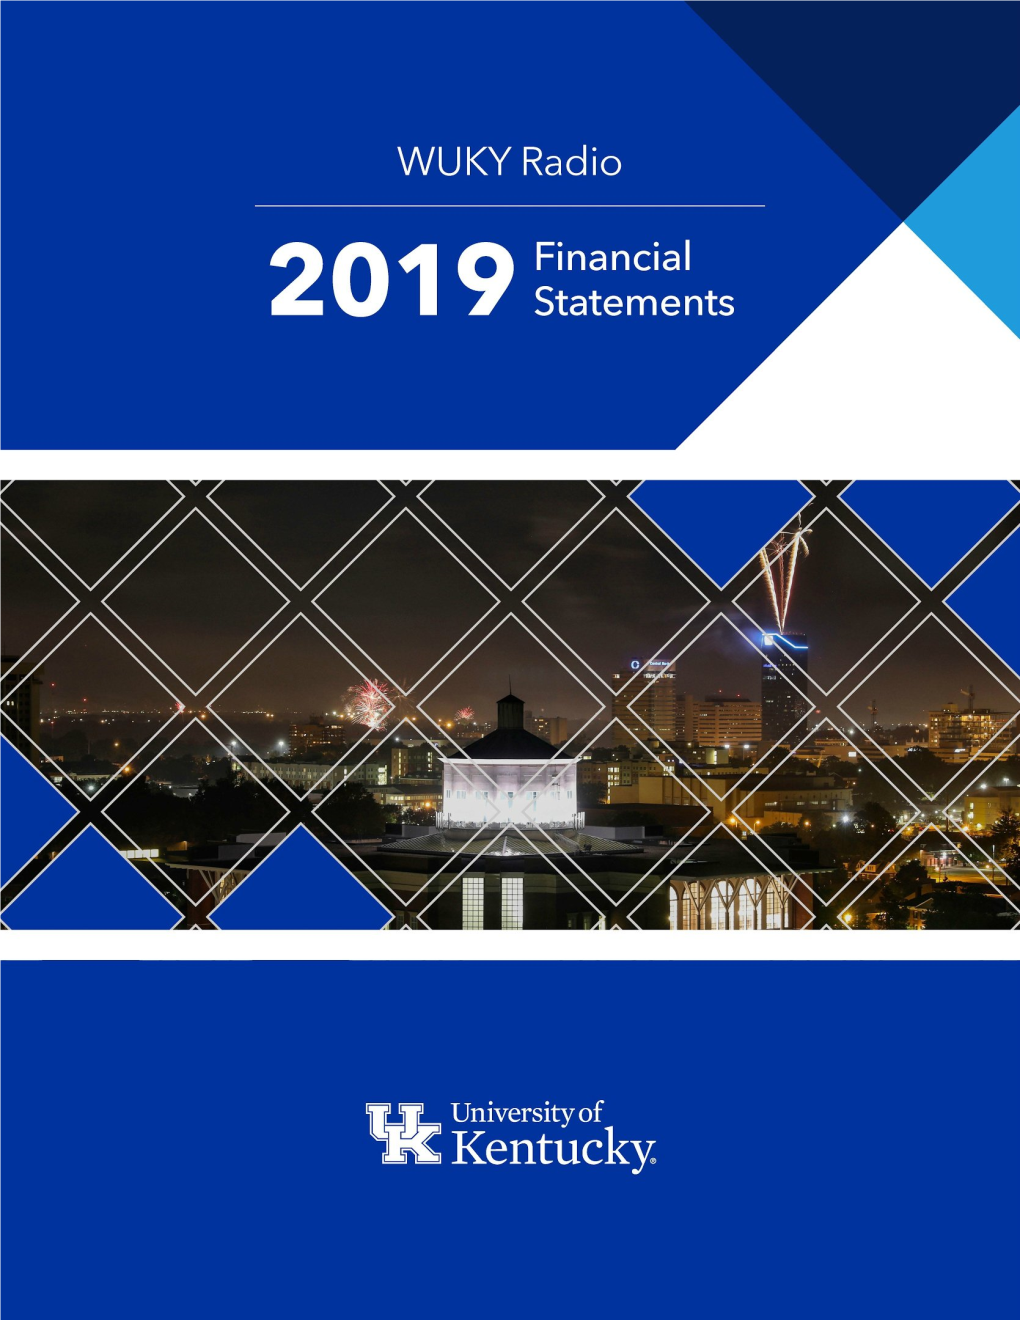 WUKY Radio a Public Telecommunications Entity an Organizational Unit of the University of Kentucky Financial Statements Years Ended June 30, 2019 and 2018